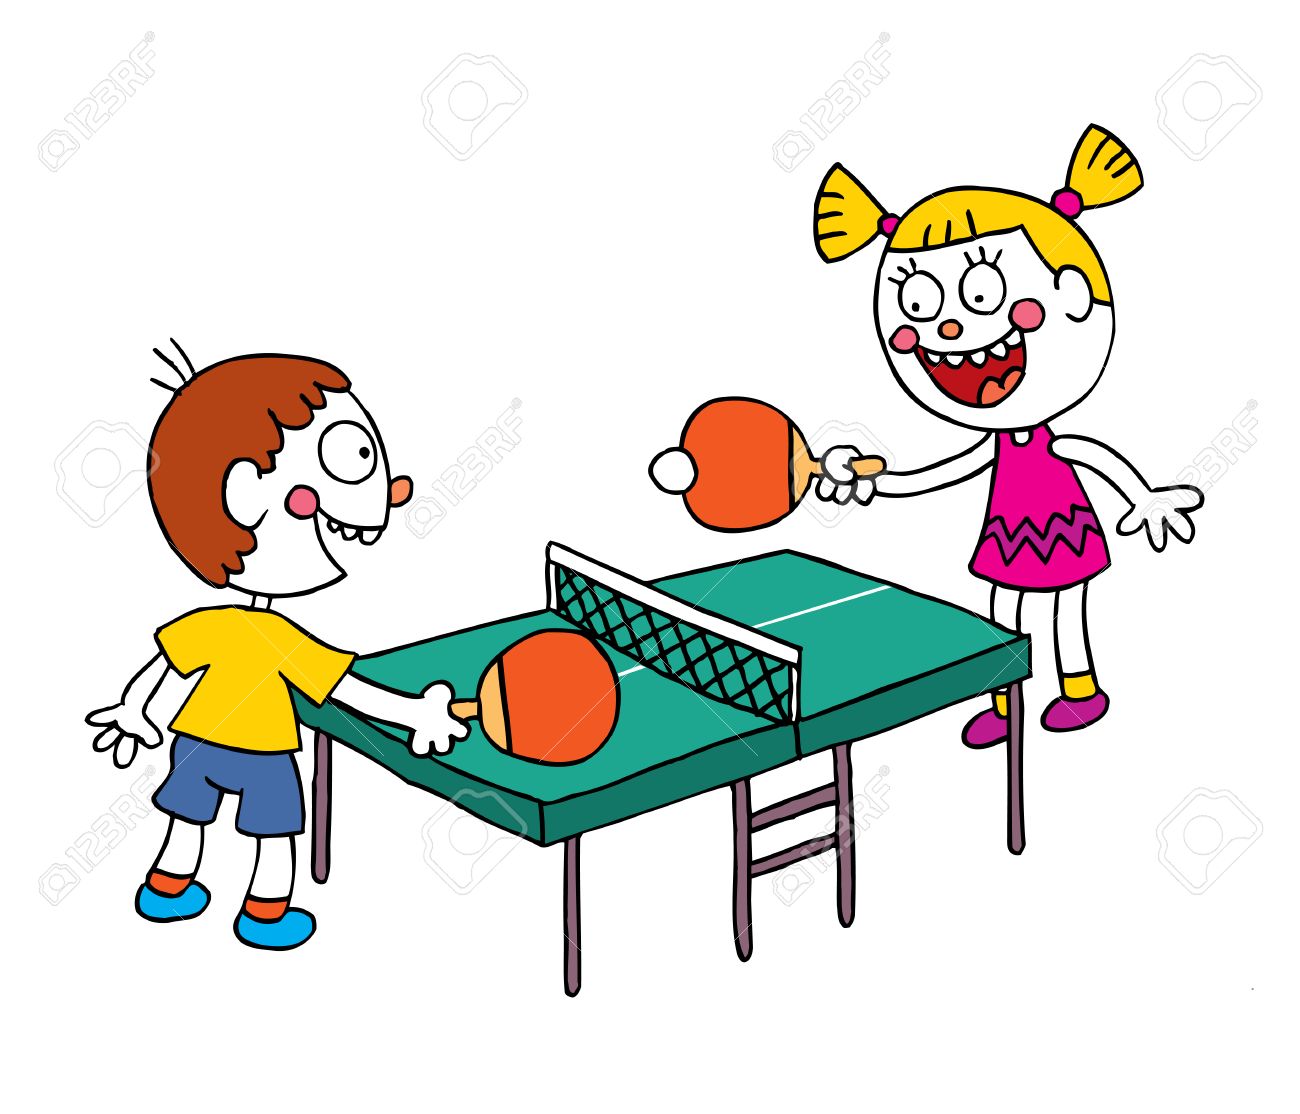 Playing table tennis clipart